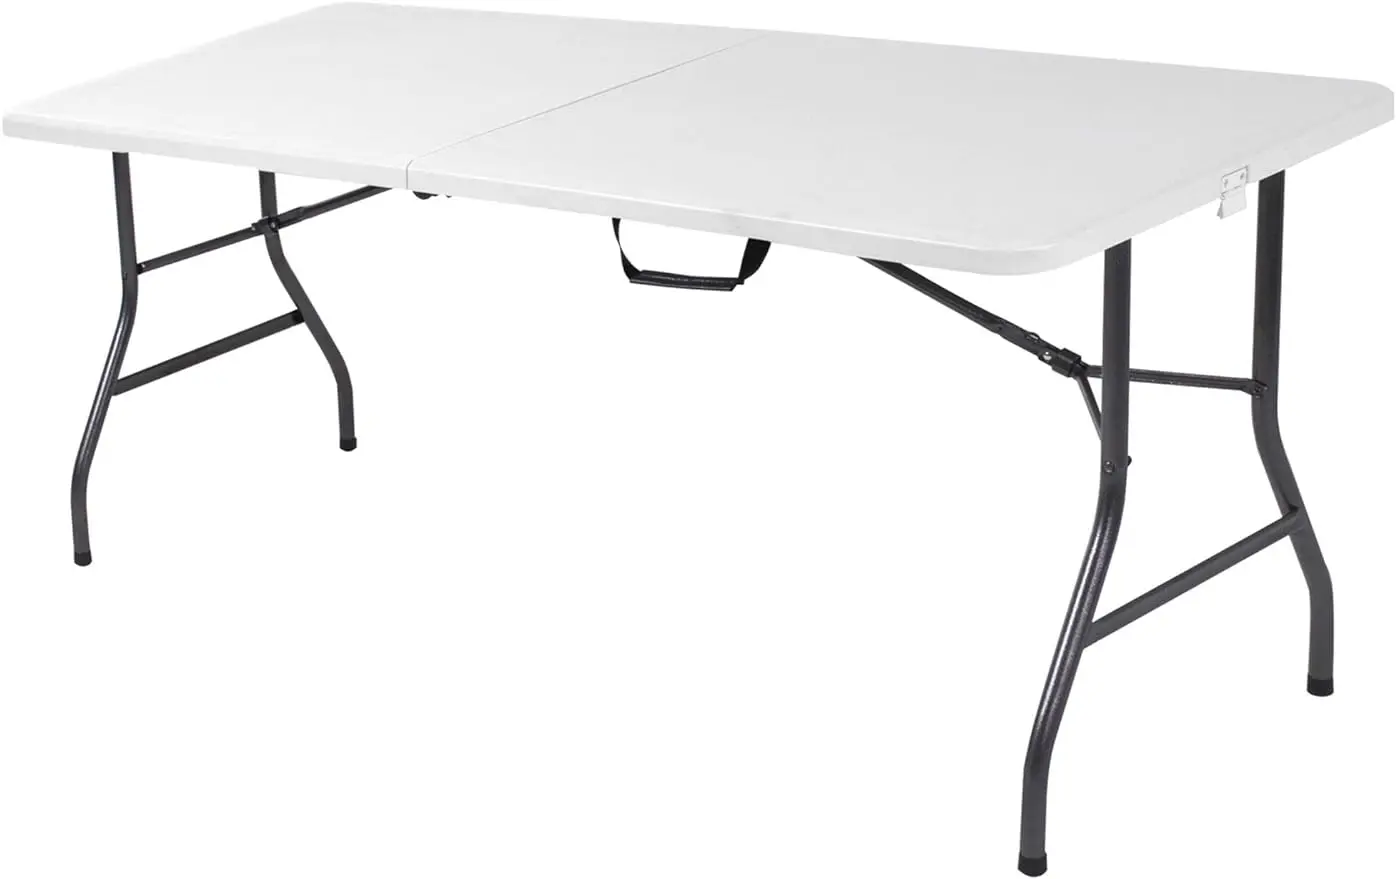 

Fold-in-Half Banquet Table w/Handle, 6 ft, White